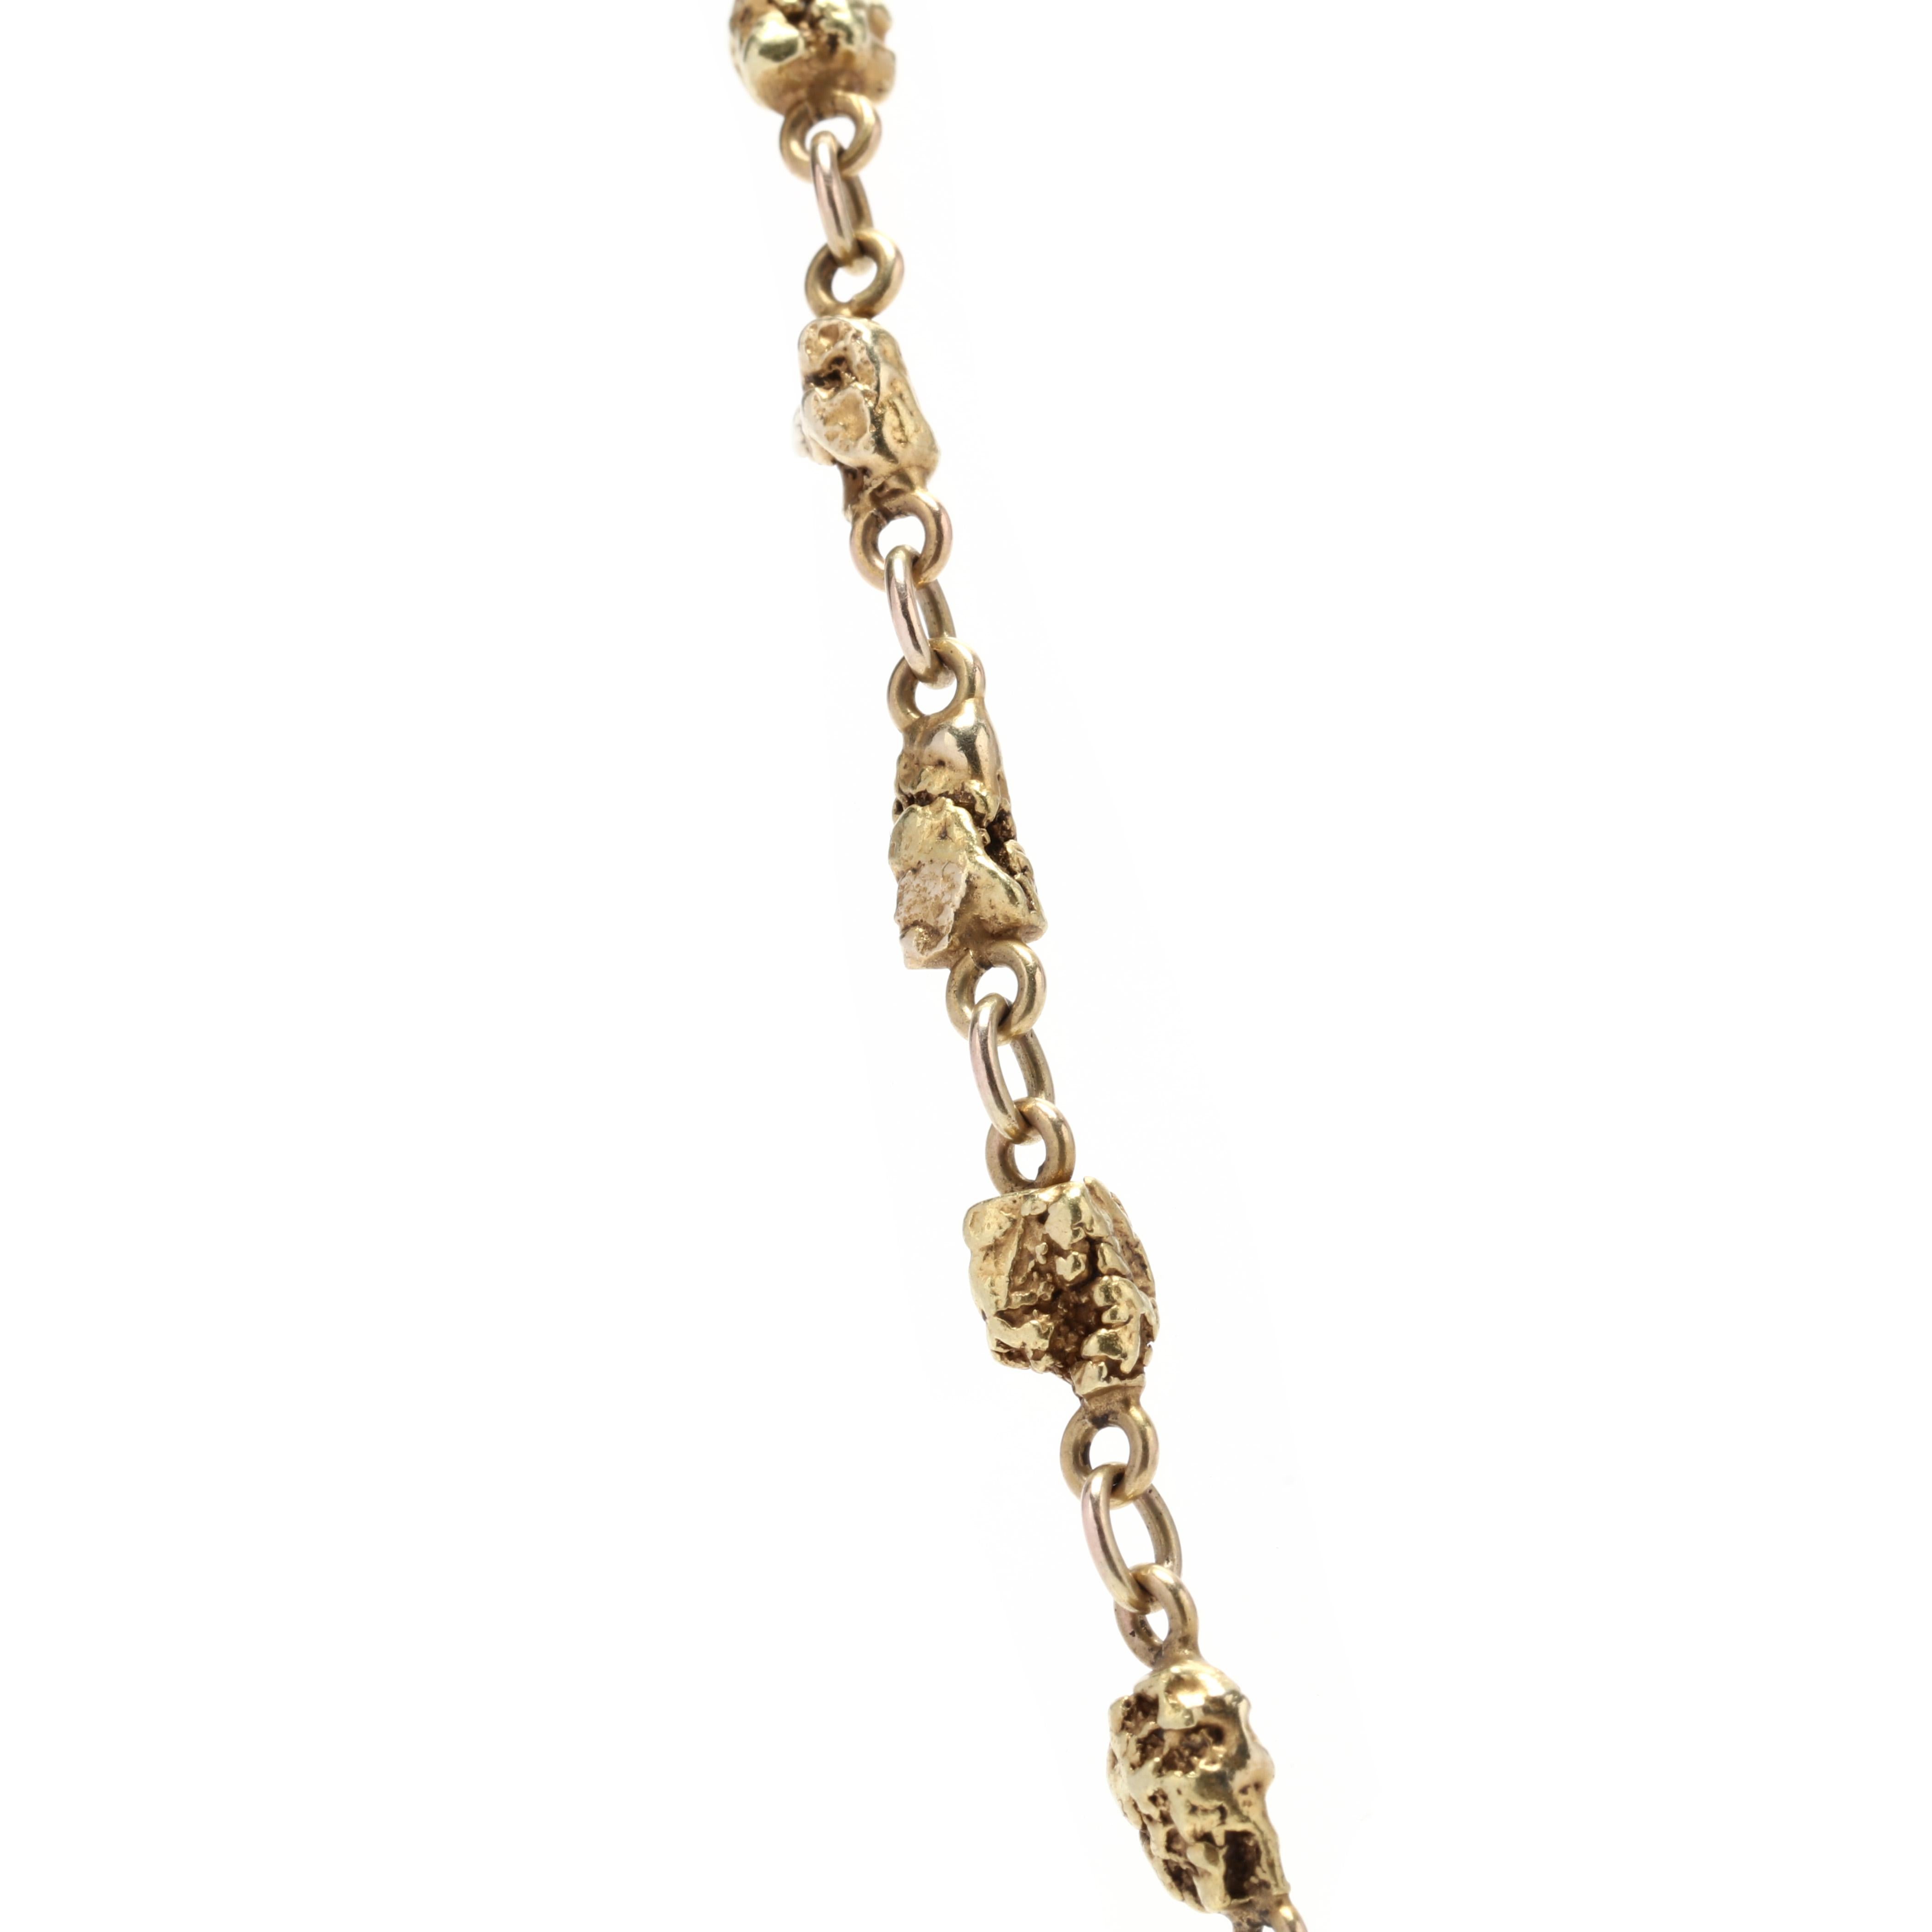 A handmade 18 and 14 karat yellow gold nugget chain. This chain features 14 karat gold nuggets linked together in the center with an 18 karat gold rolo chain on either side with a spring ring clasp.



Length: 16.25 in.



Width: 5.5 mm



Weight: